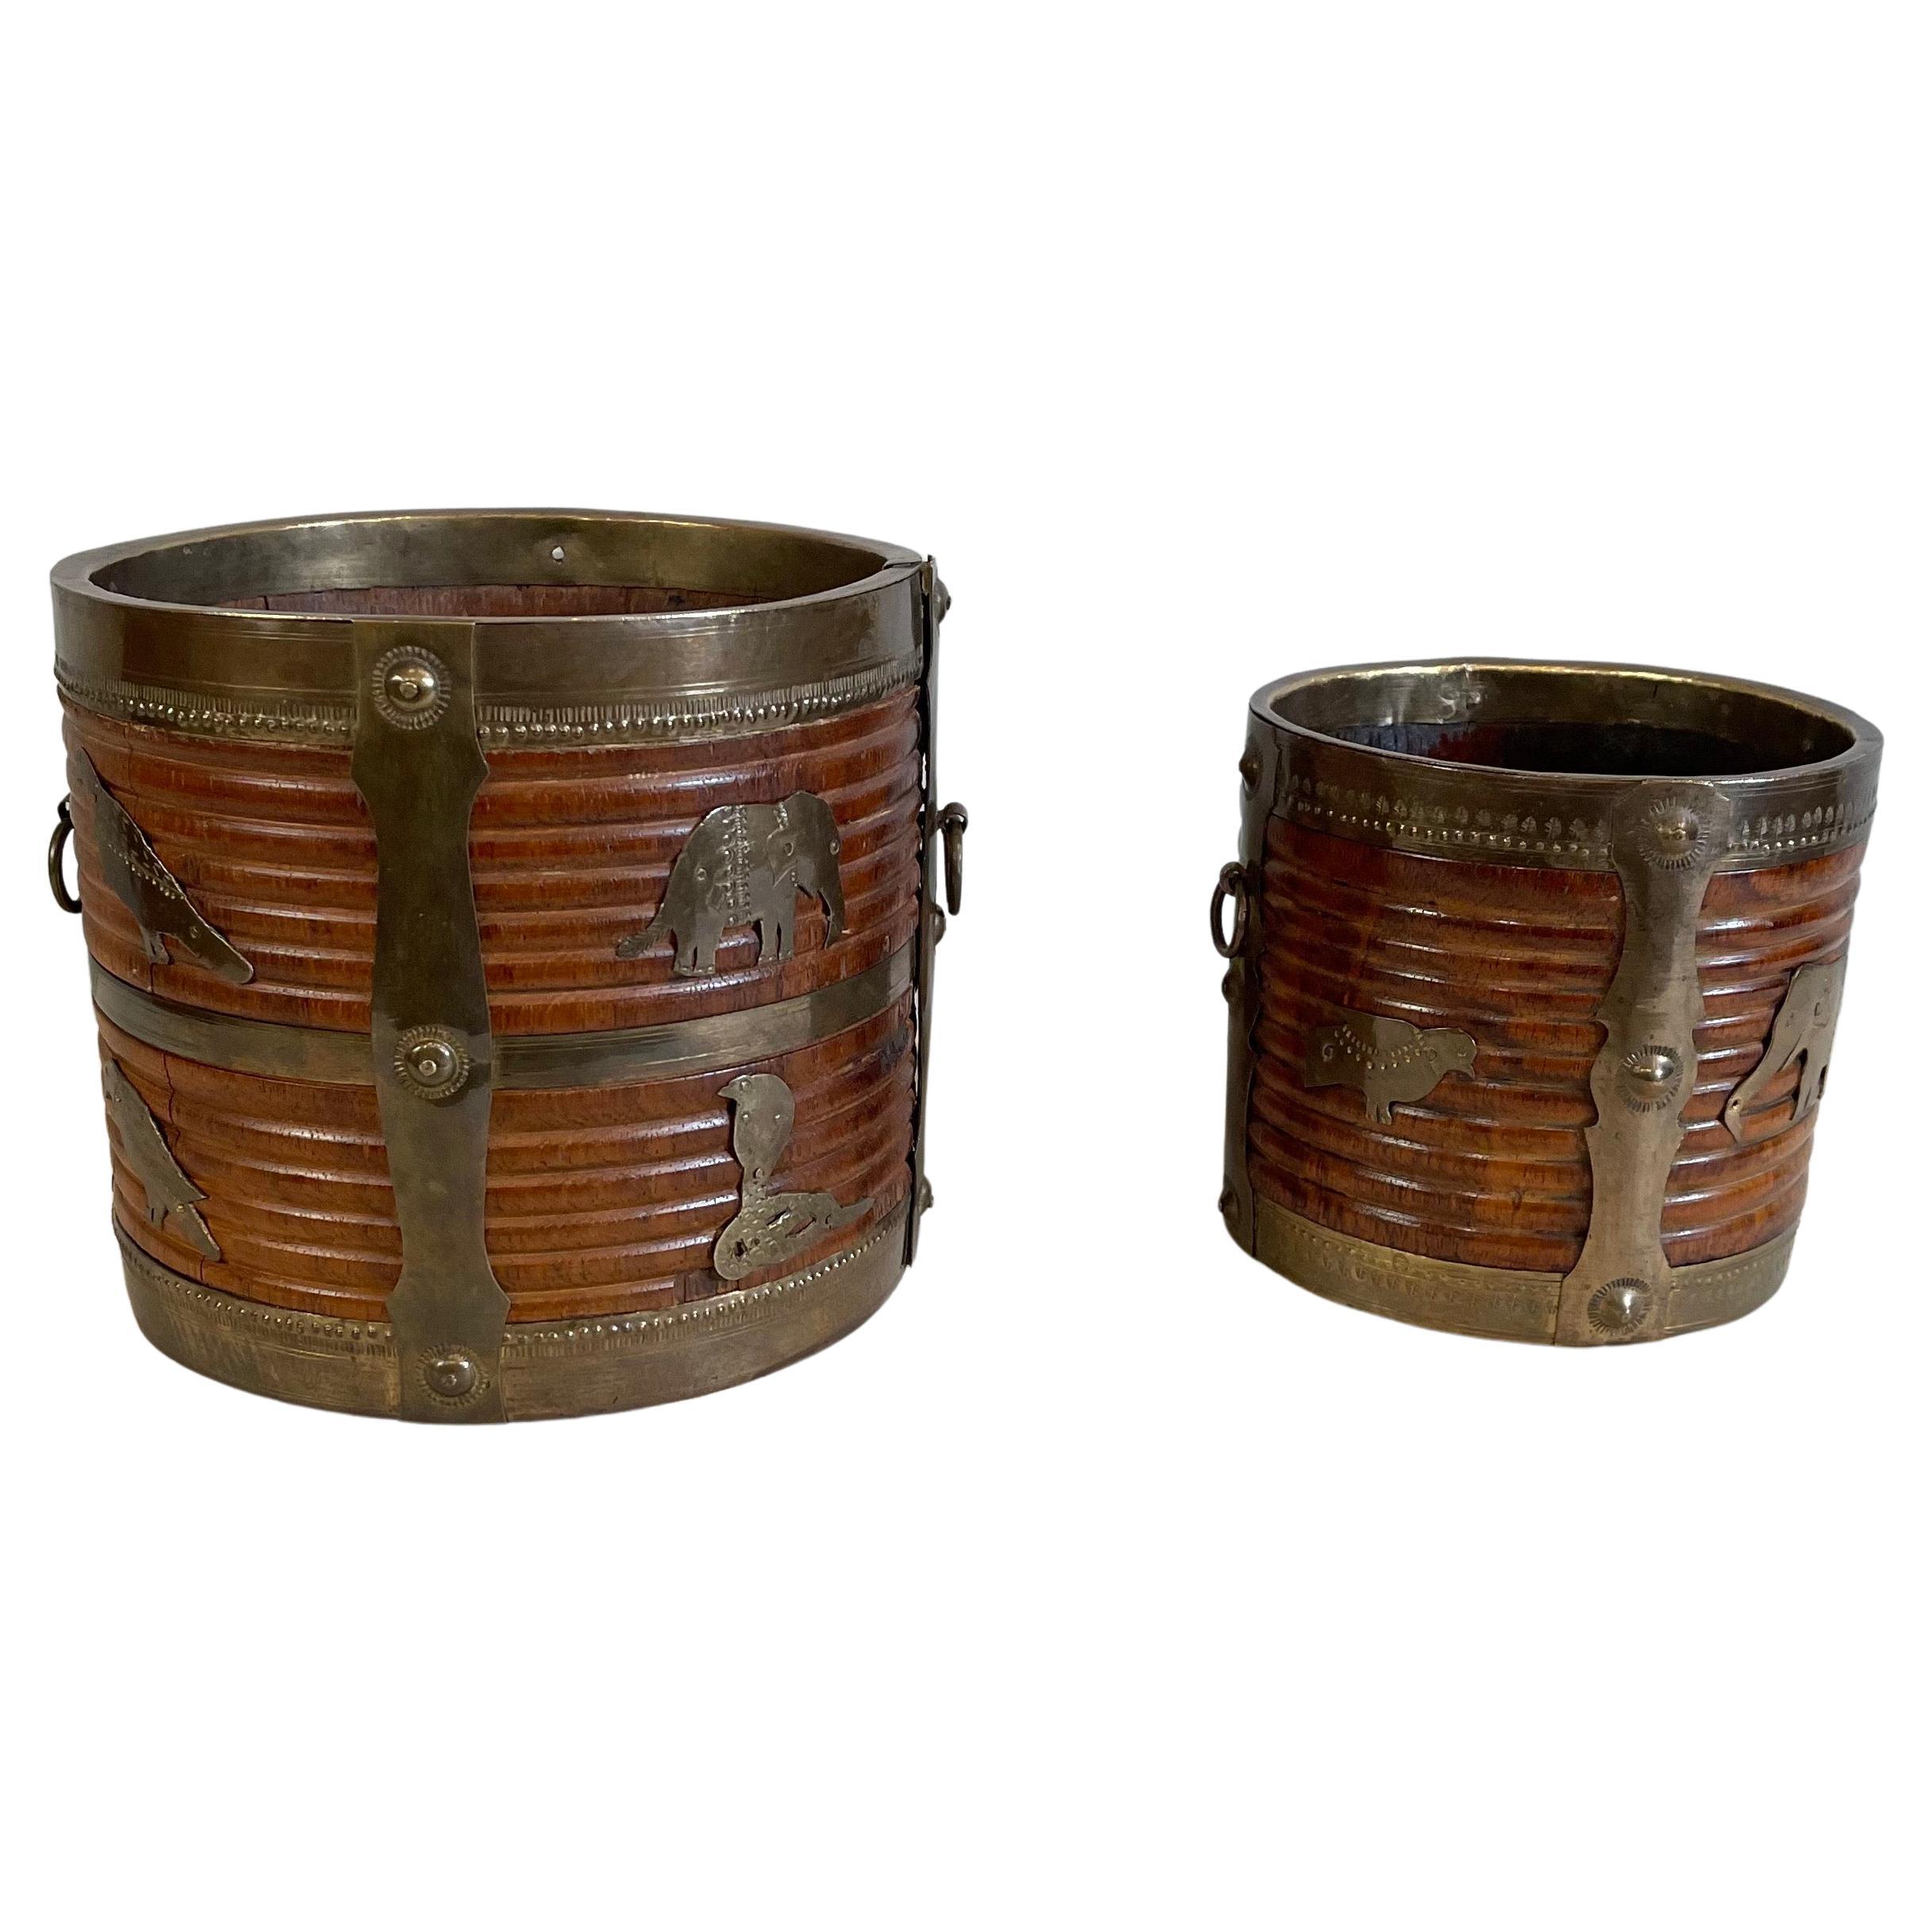 2 Antique 19th century Anglo Indian brass bound carved wood peat buckets with turned, reeded Design and applied brass animals. including, lovely patina, carved from a single piece of wood. Good condition - a minor age cracks.